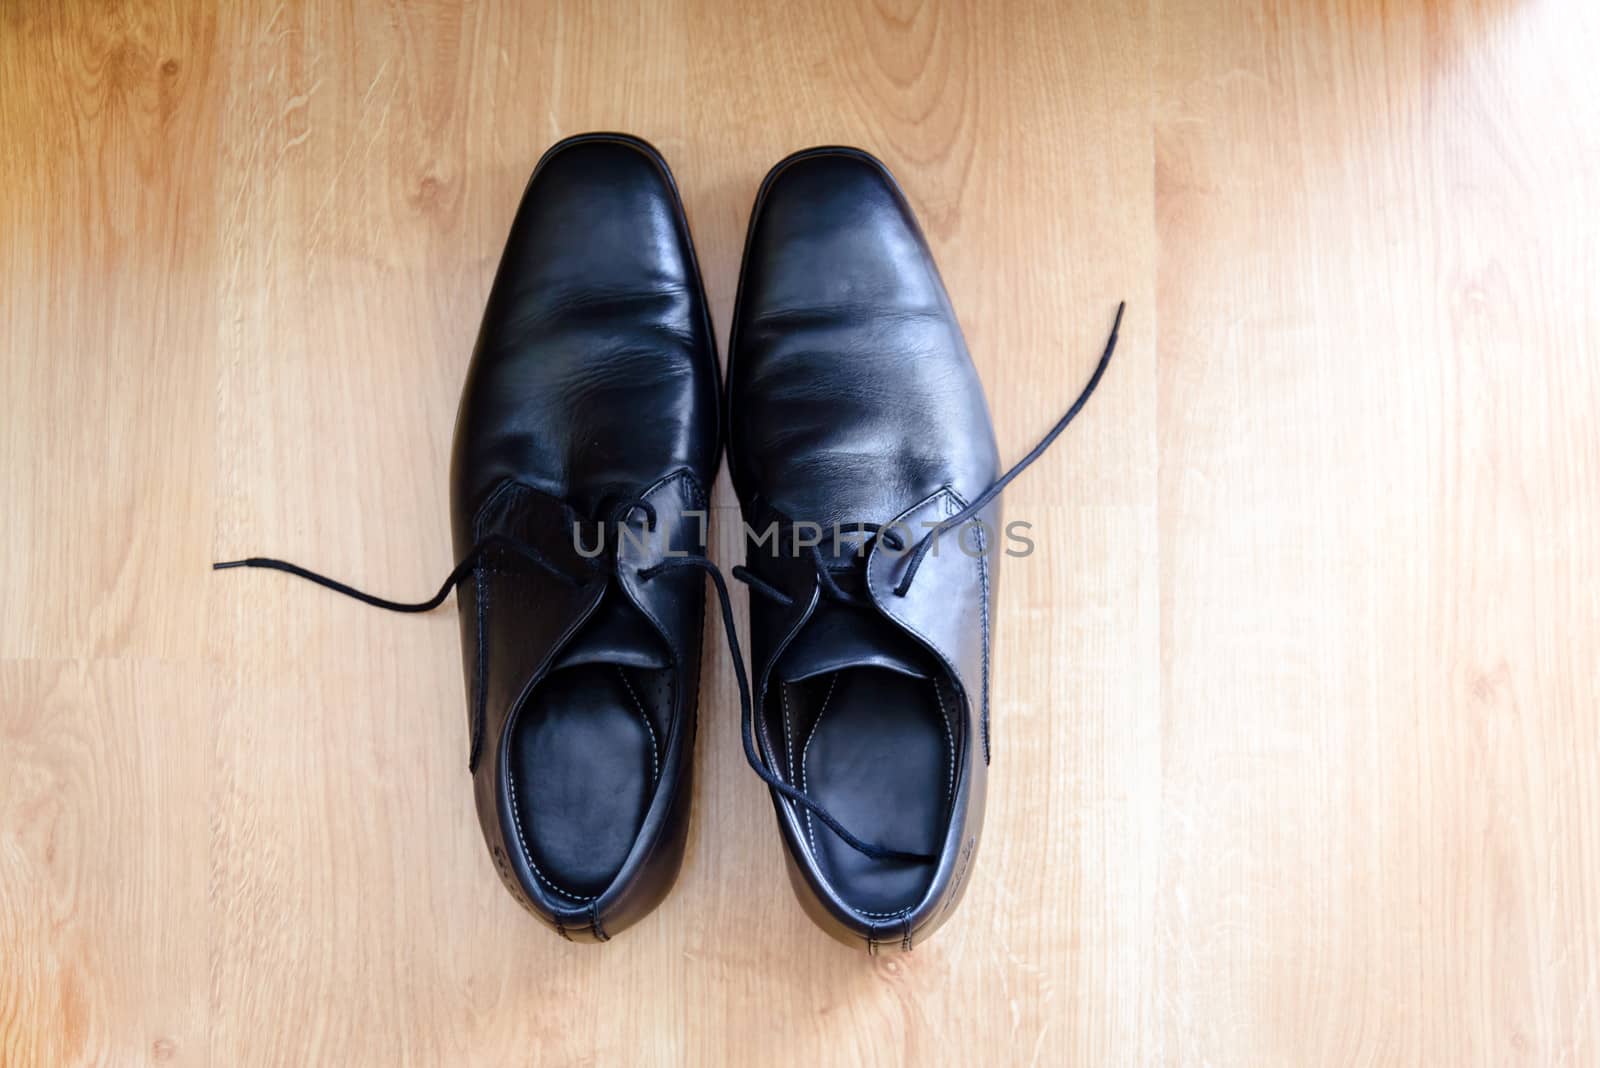 Shot from above, in wooden pattern background, a pair of men's black  elegant shoes for suit.